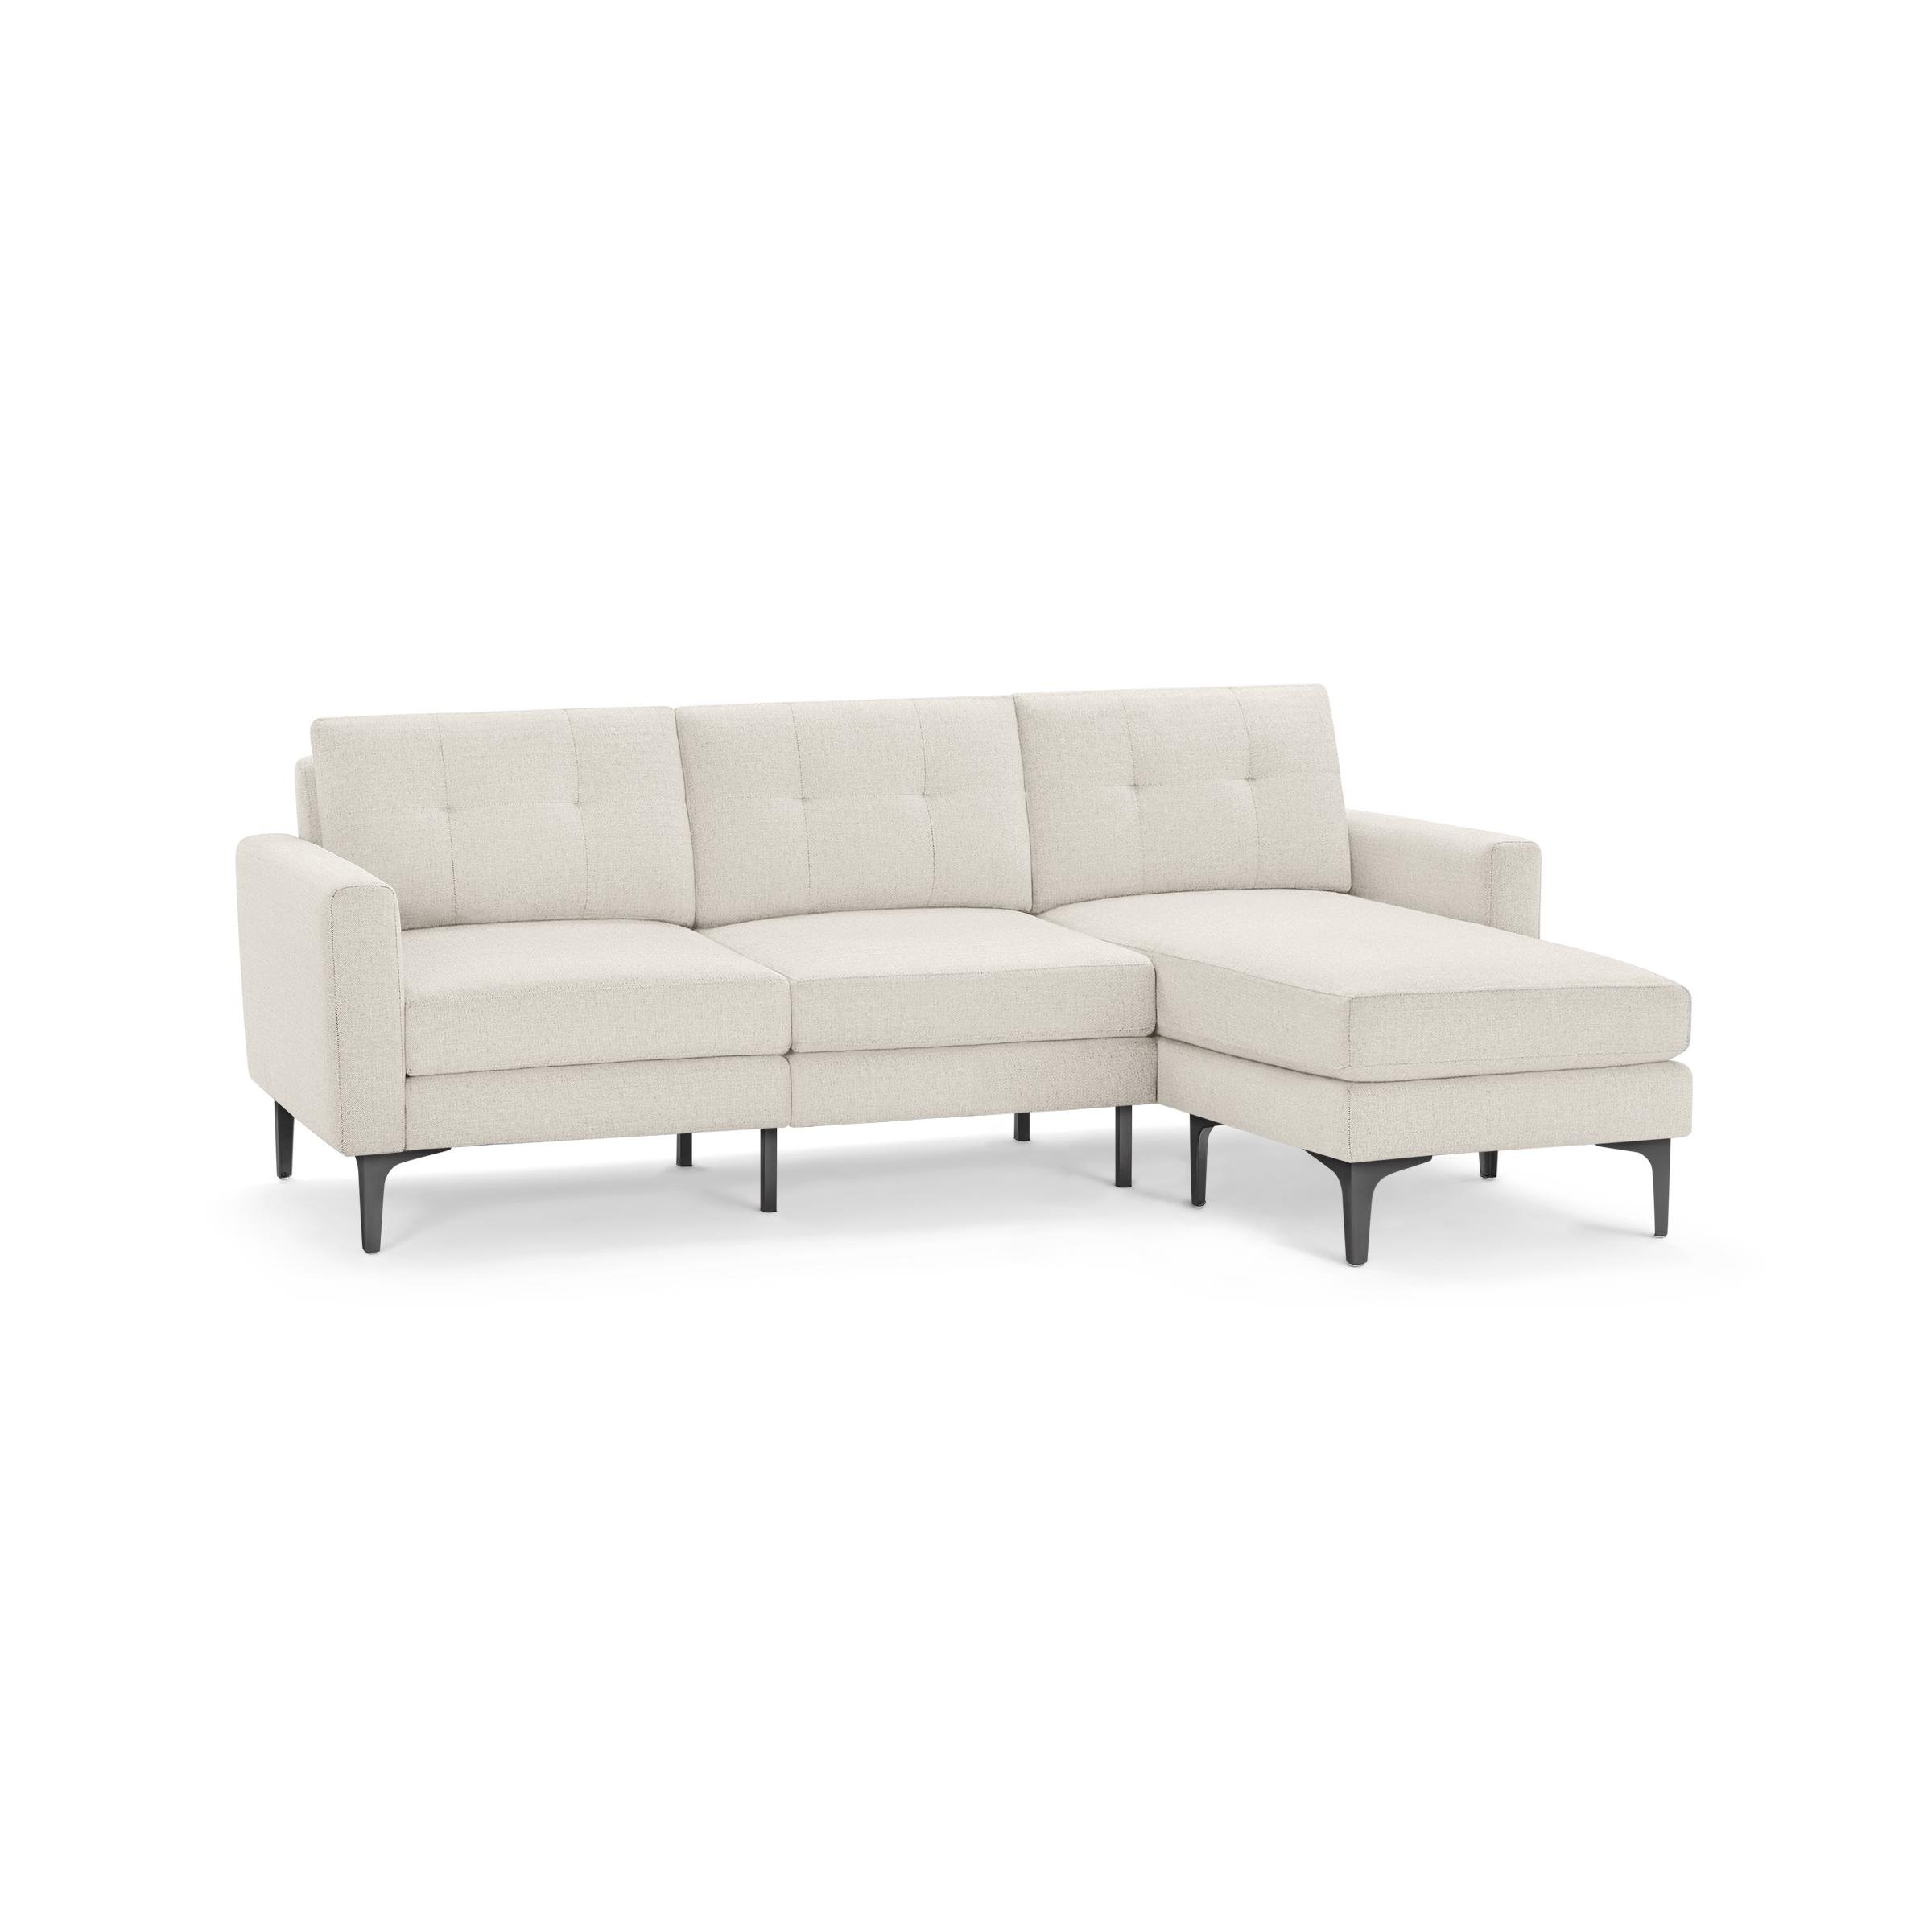 The Block Nomad Sectional Sofa in Ivory - Image 1